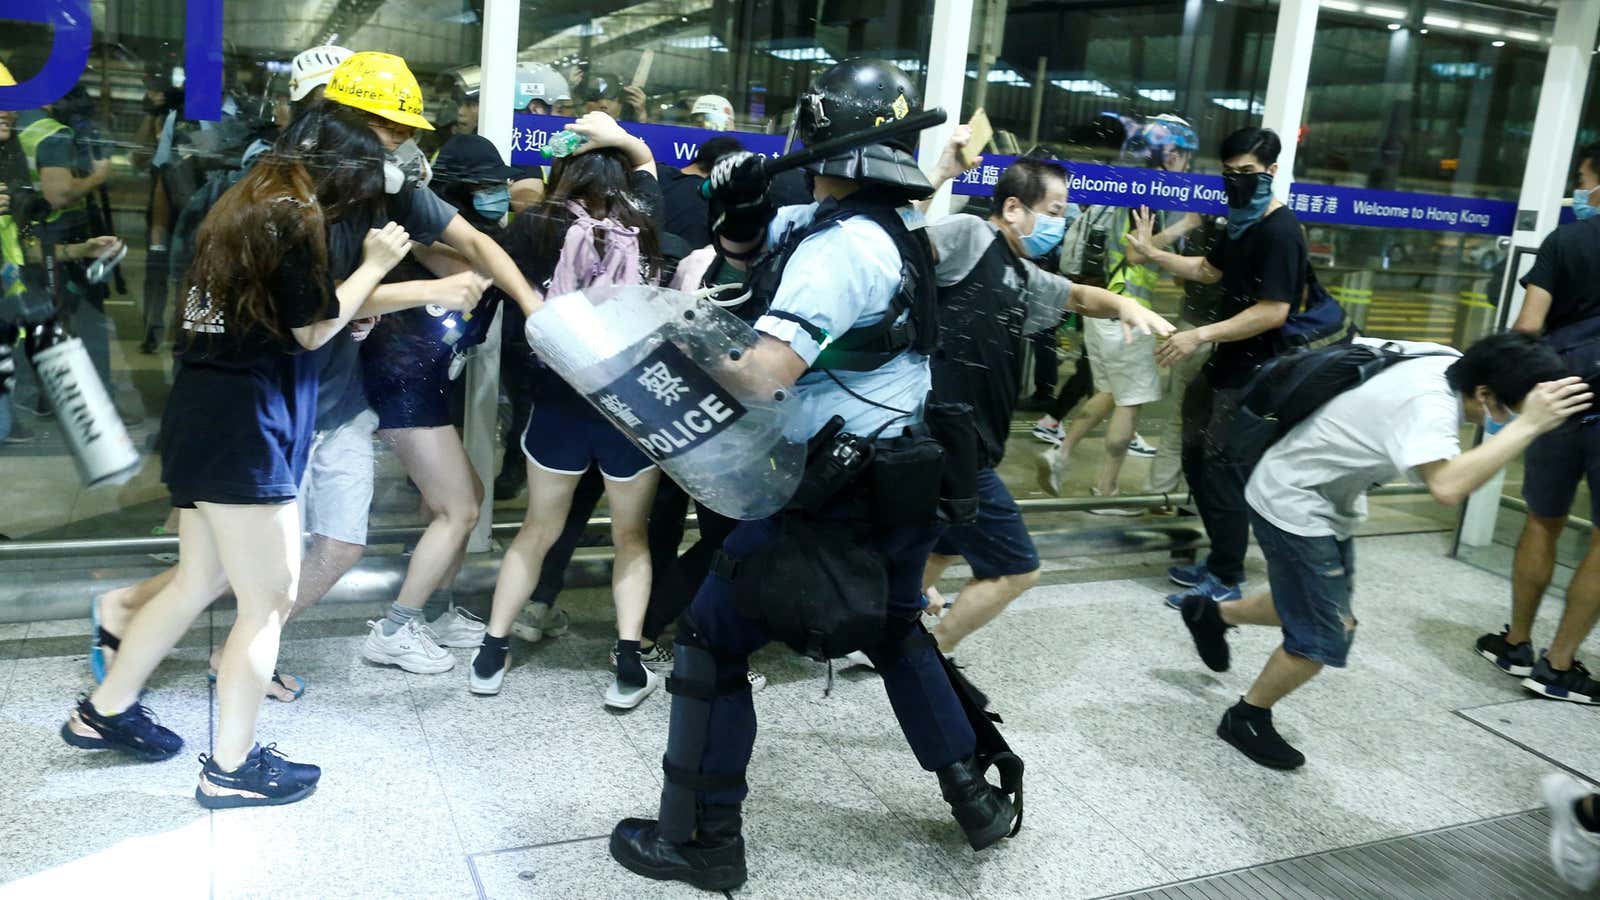 Police clash with anti-government protesters at the airport in Hong Kong.